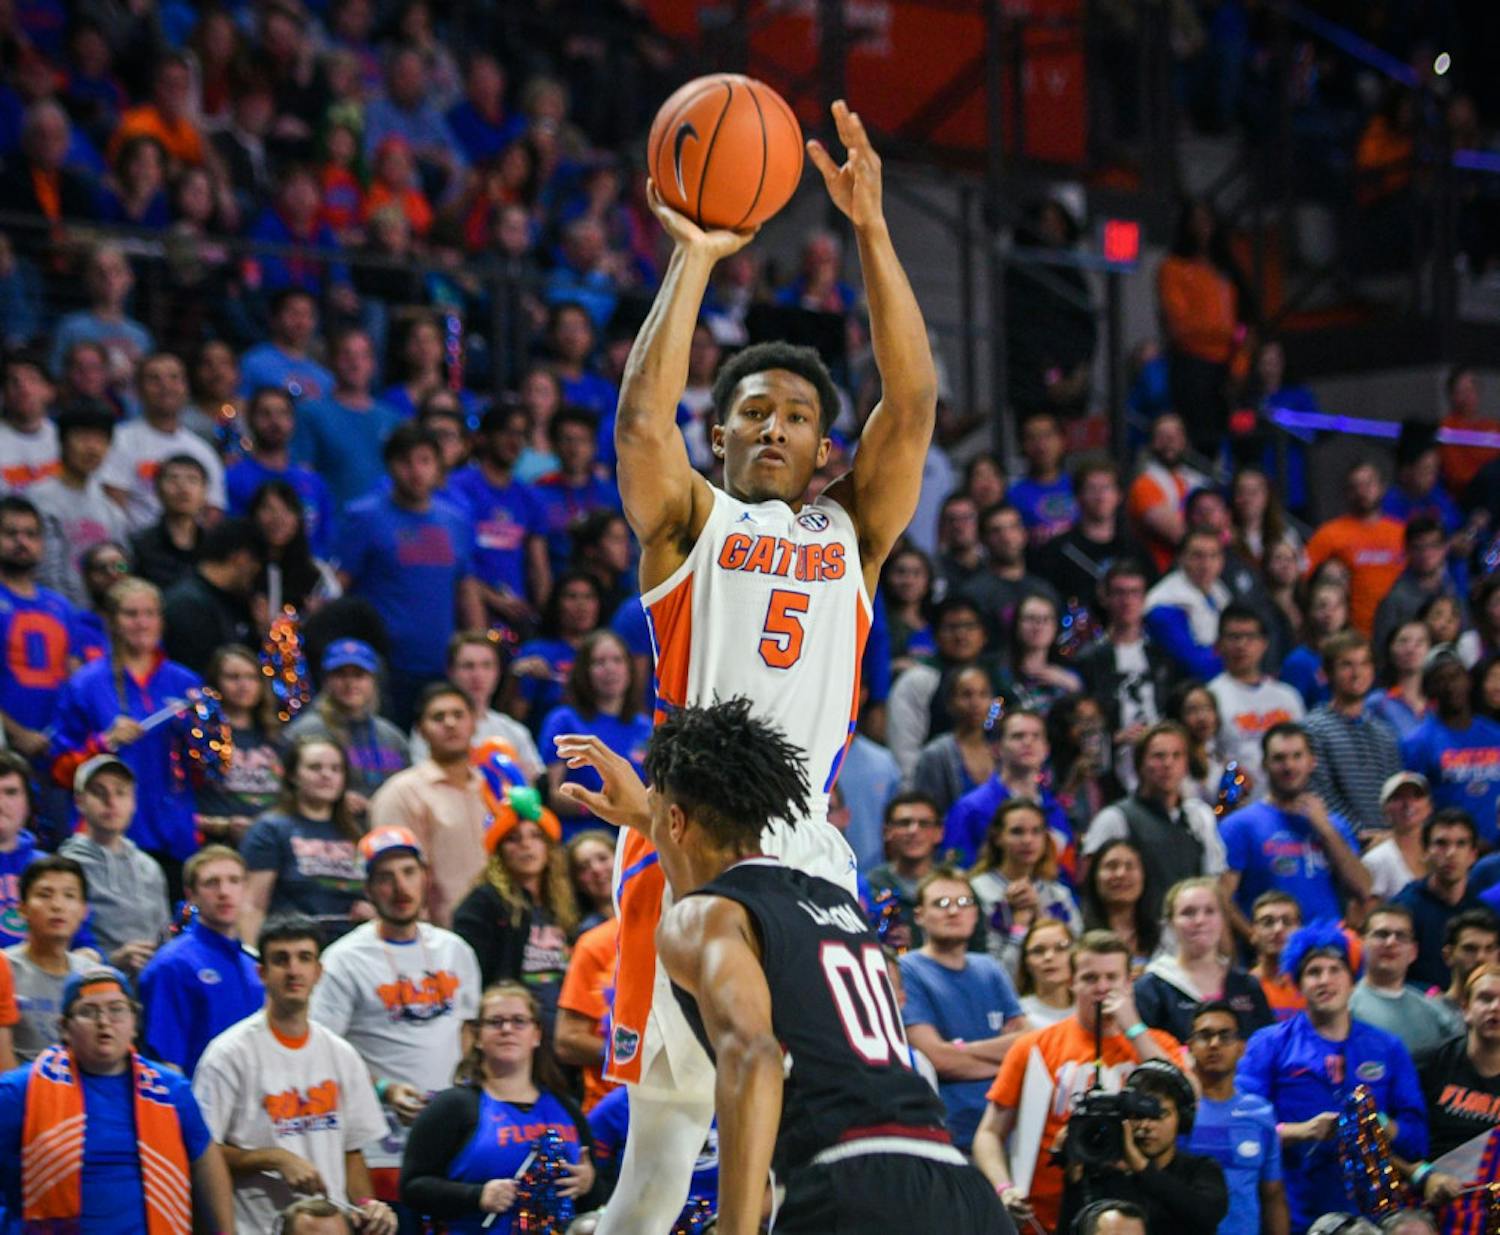 Florida guard KeVaughn Allen scored 18 points during Florida's 57-51 win over Arkansas. He went 11 of 12 from the free-throw line.
&nbsp;